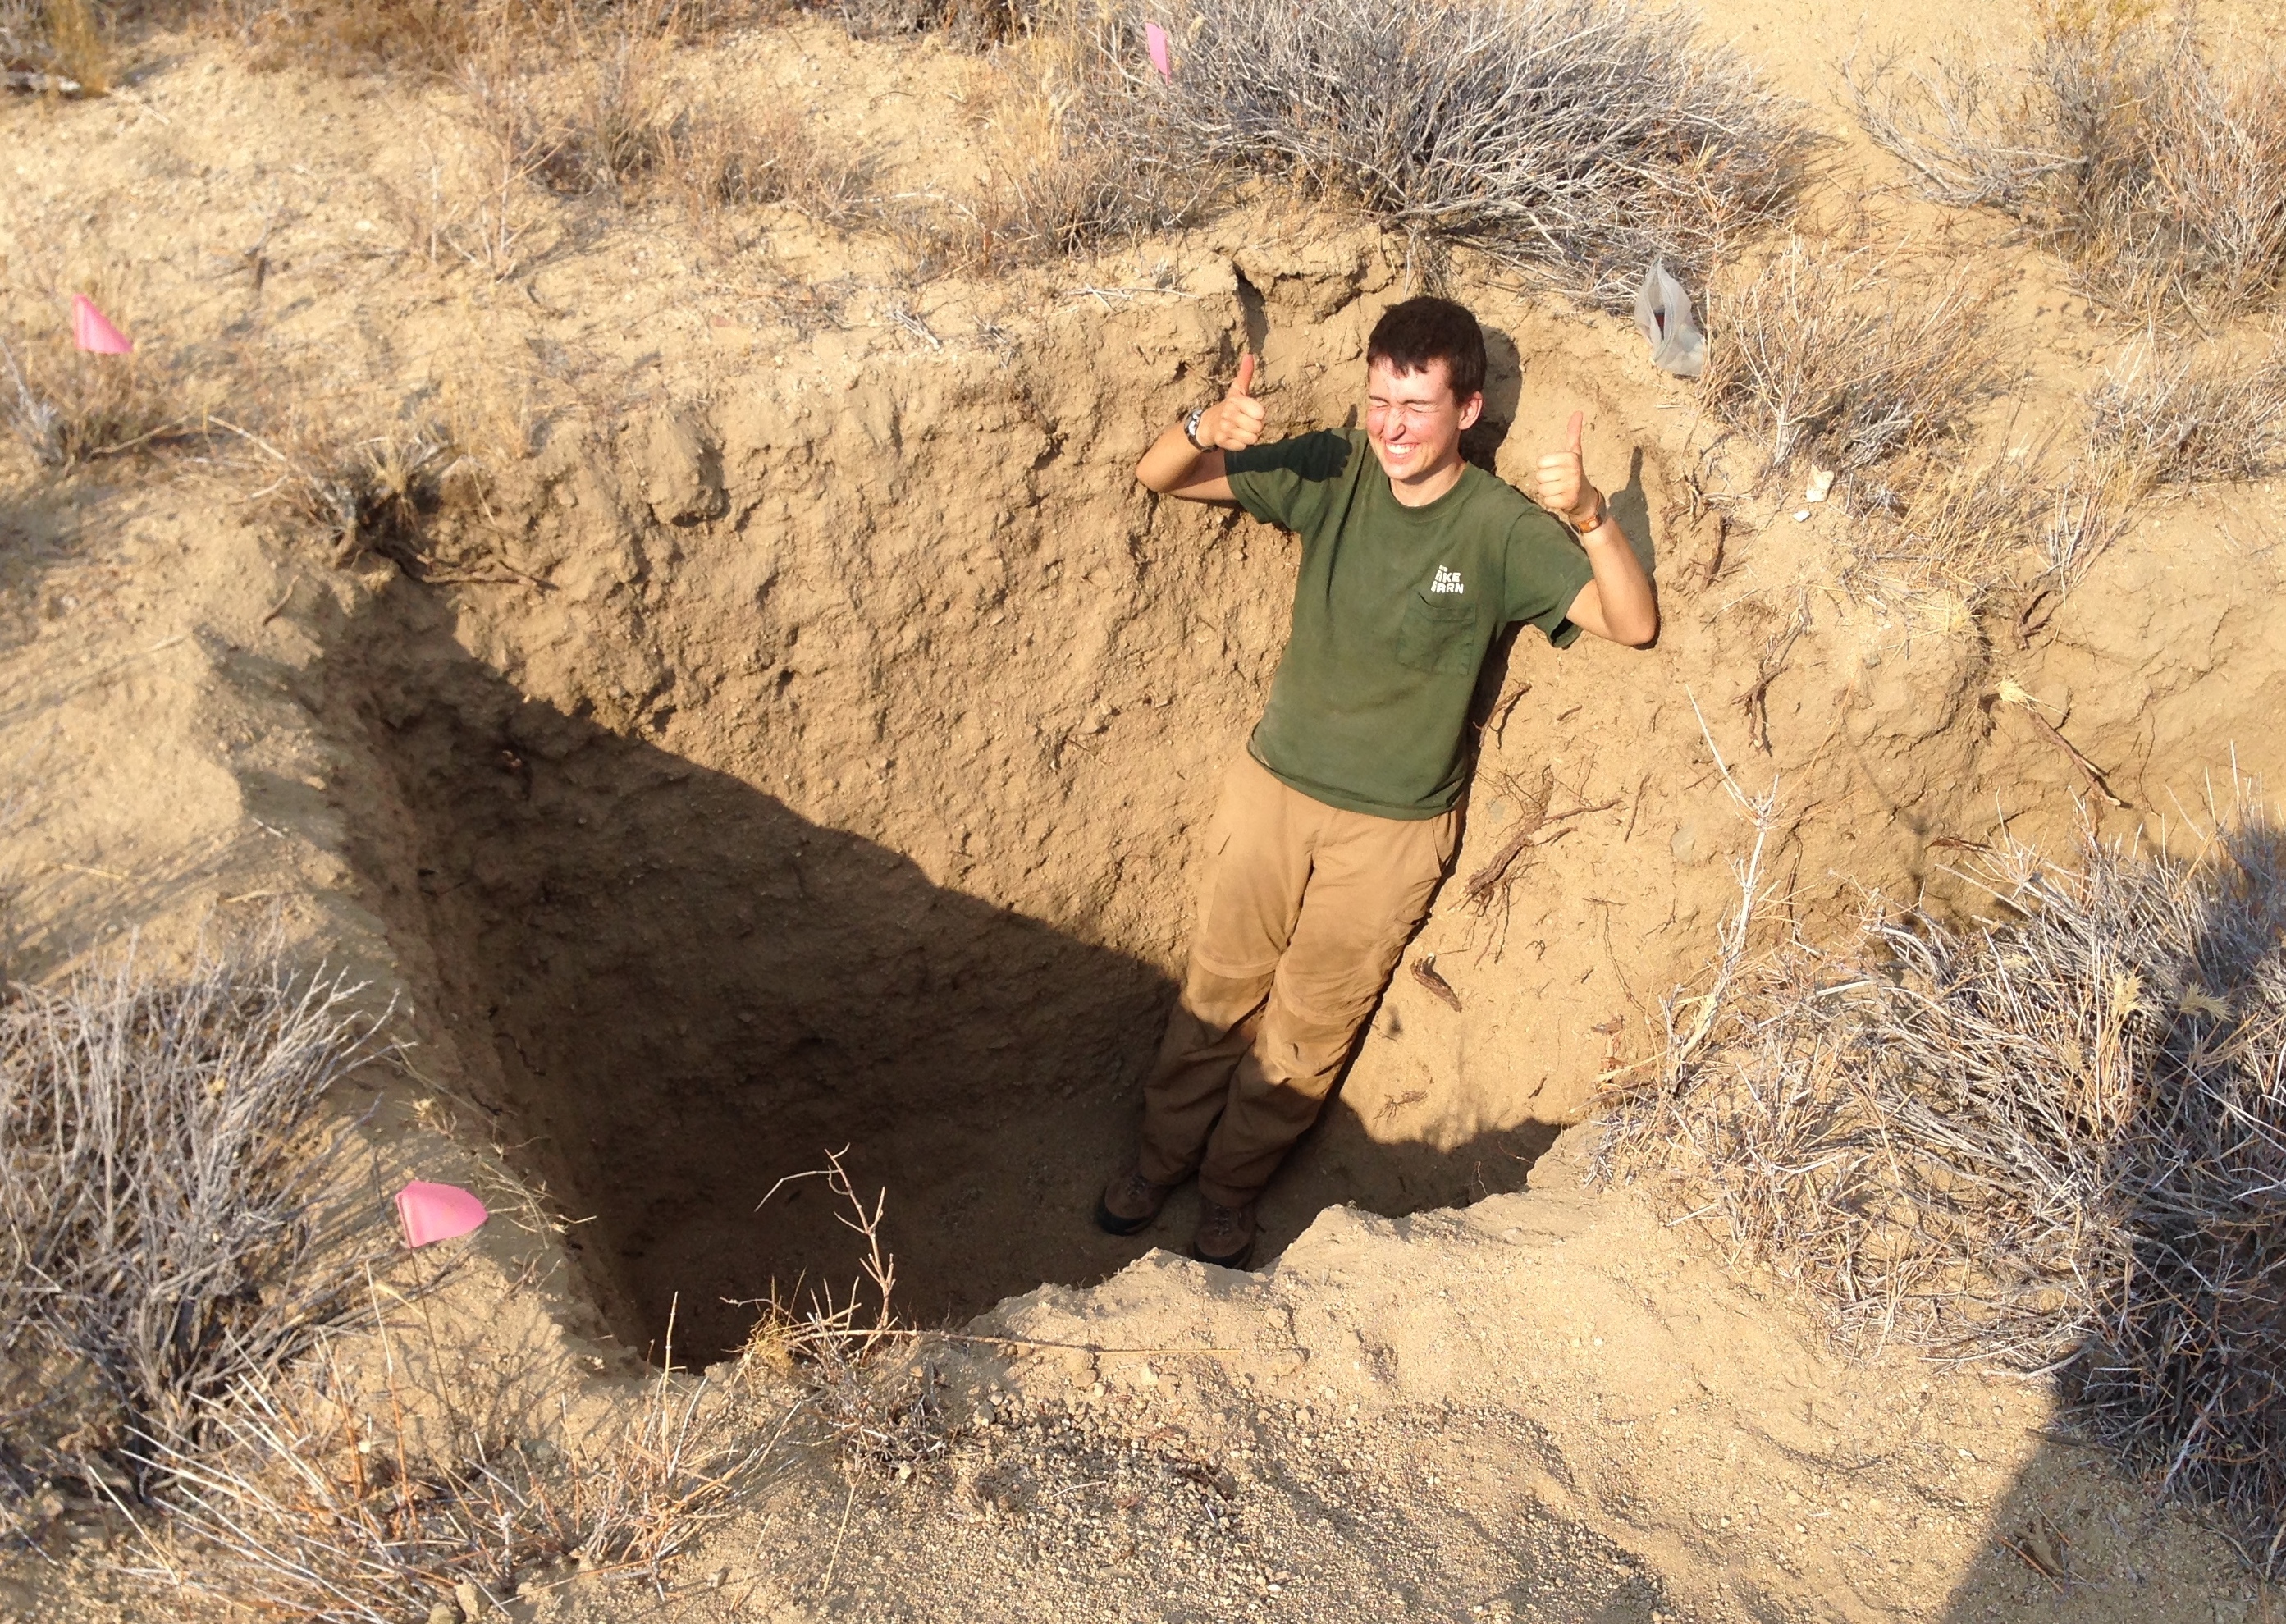 white person standing in a soil pit (in semi-arid environment) qearing field clothes gives two thumbs up